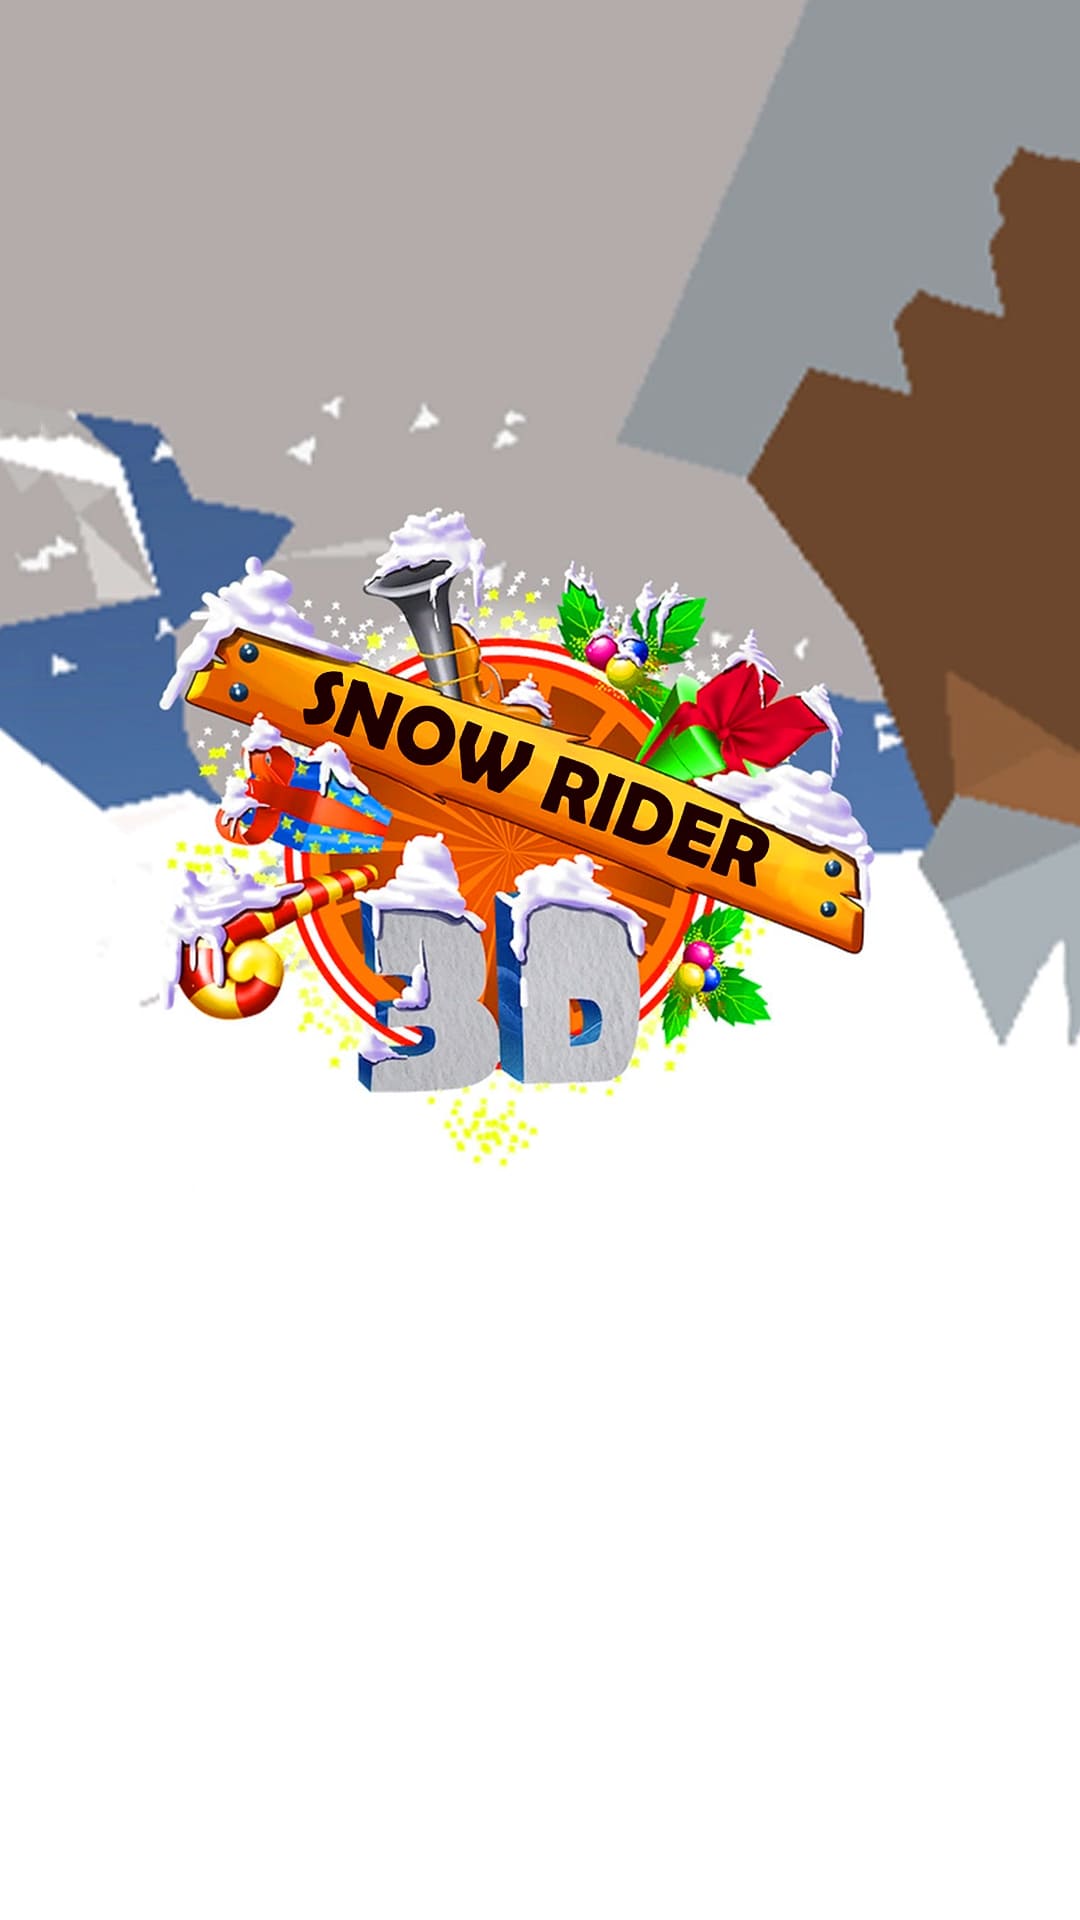 Snow Rider 3d Wallpapers